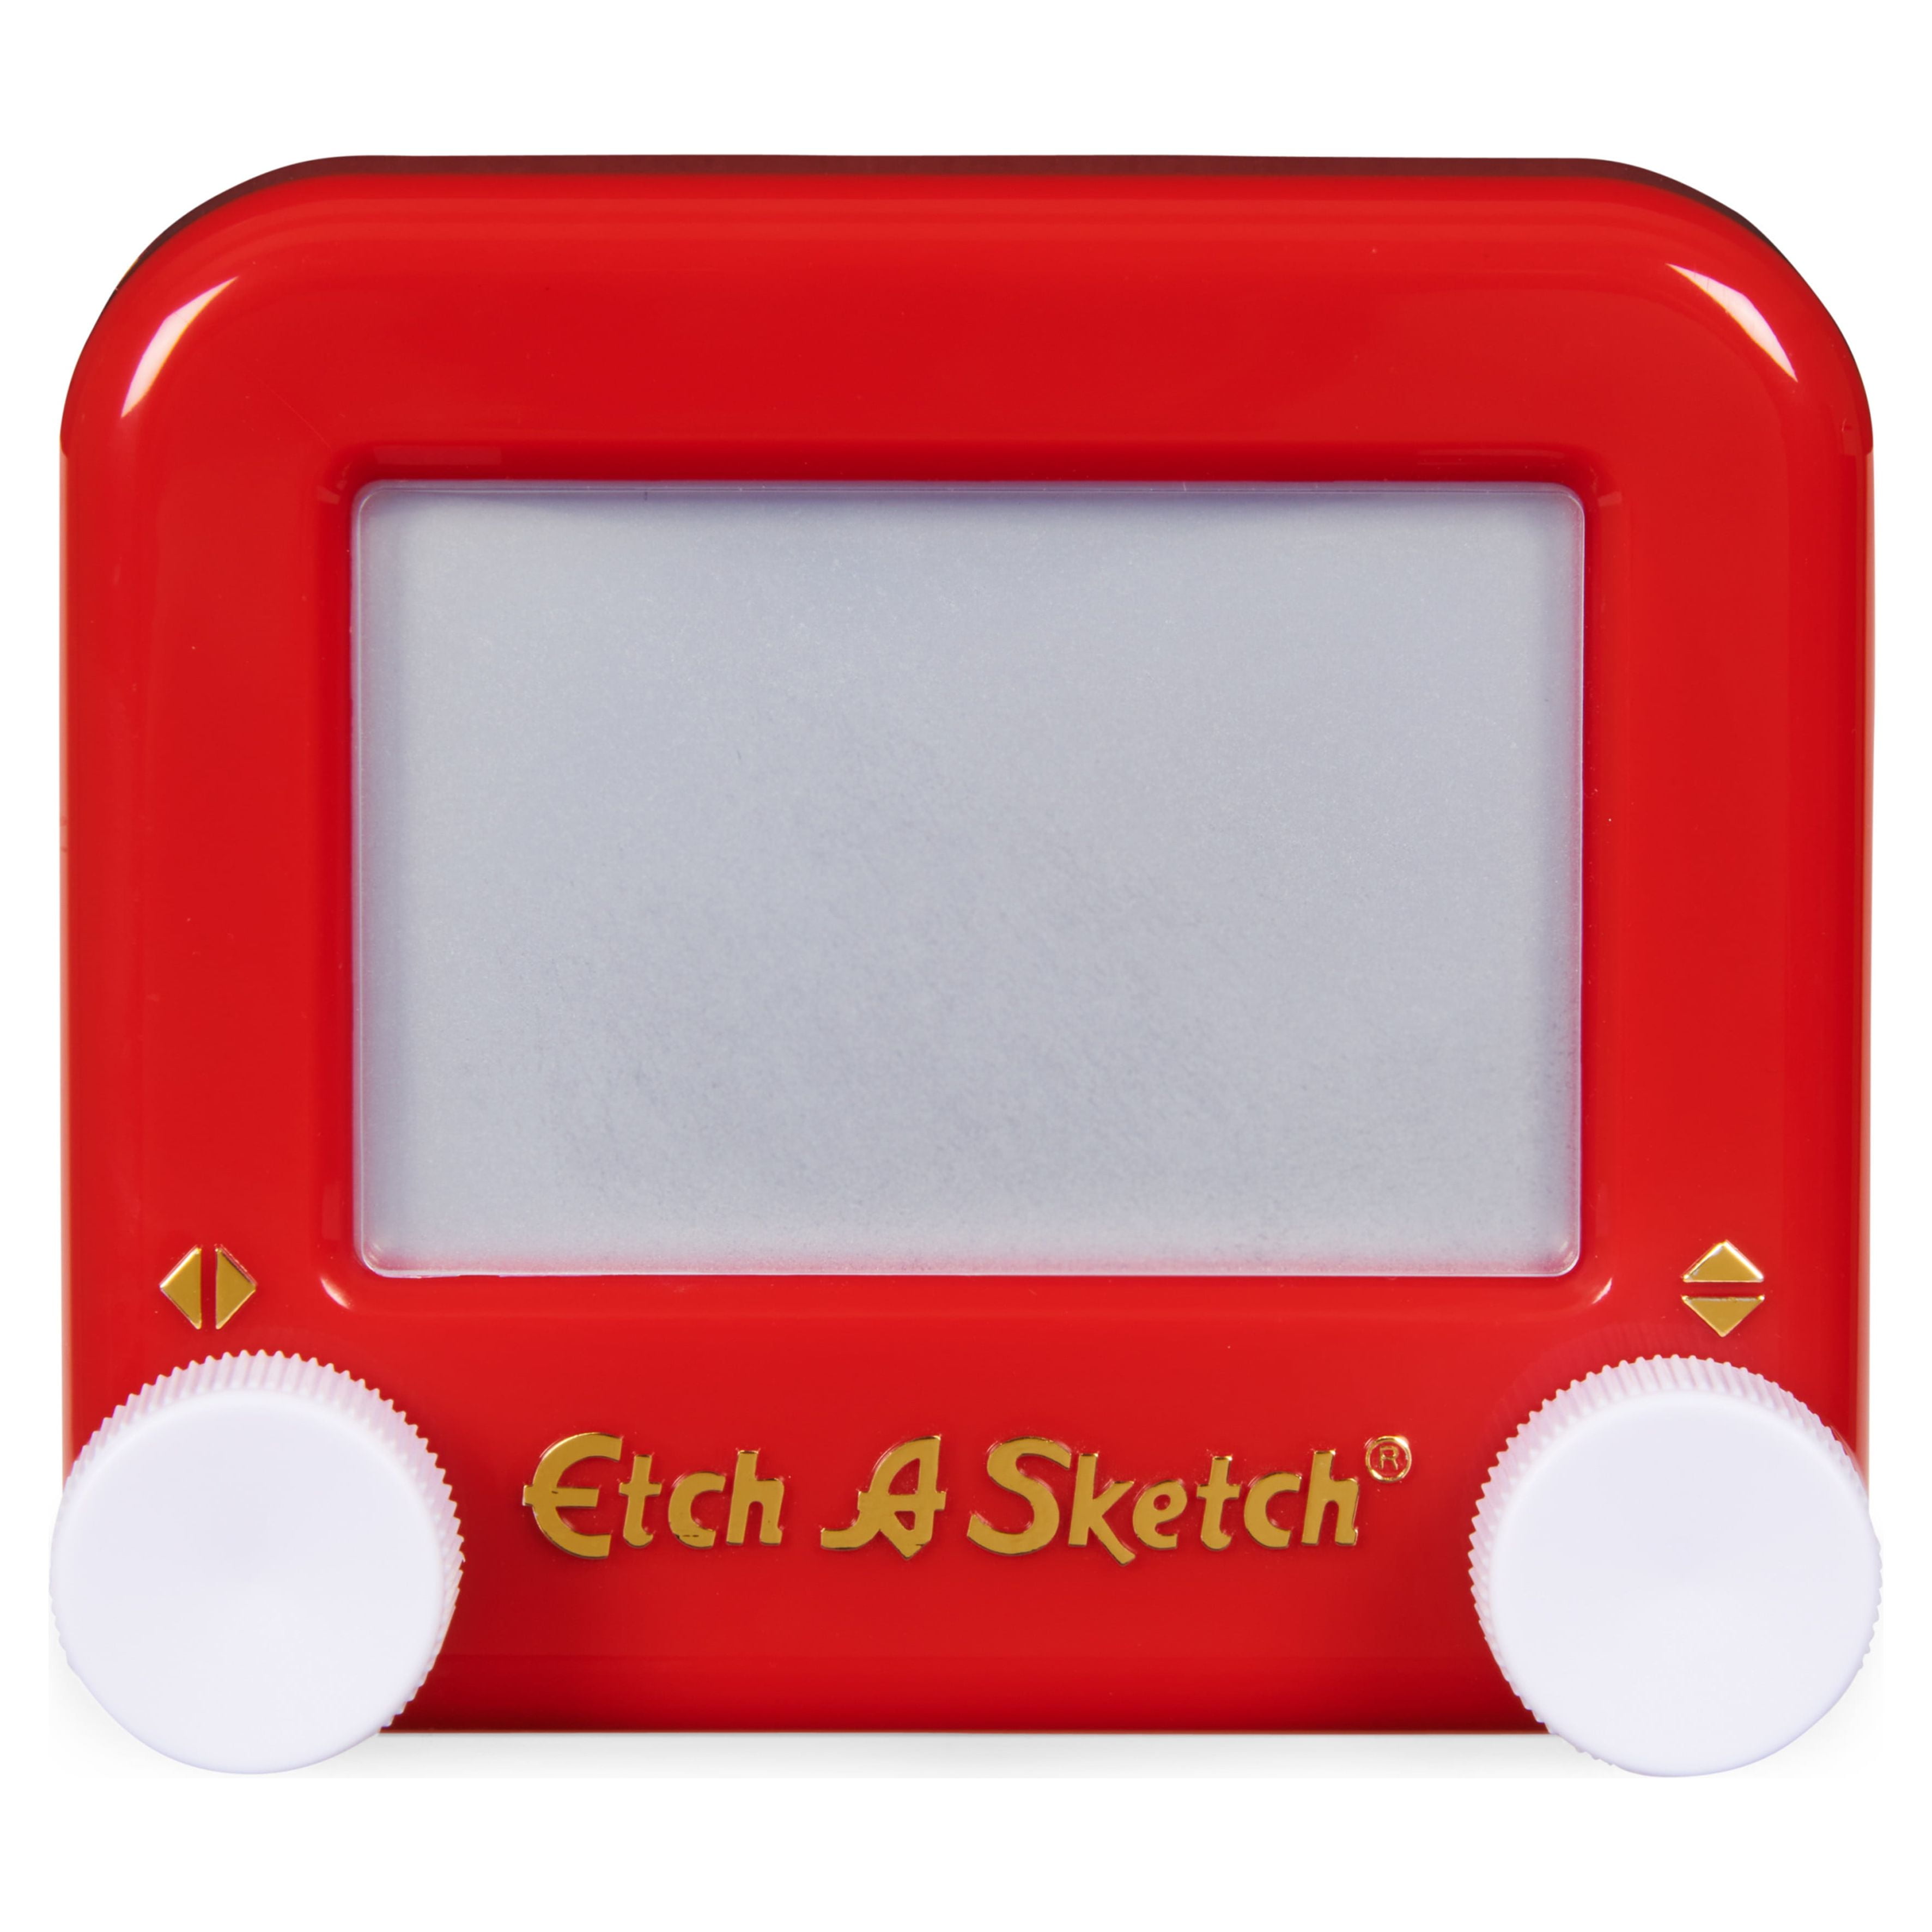 world's smallest- etch a sketch - The Little Things